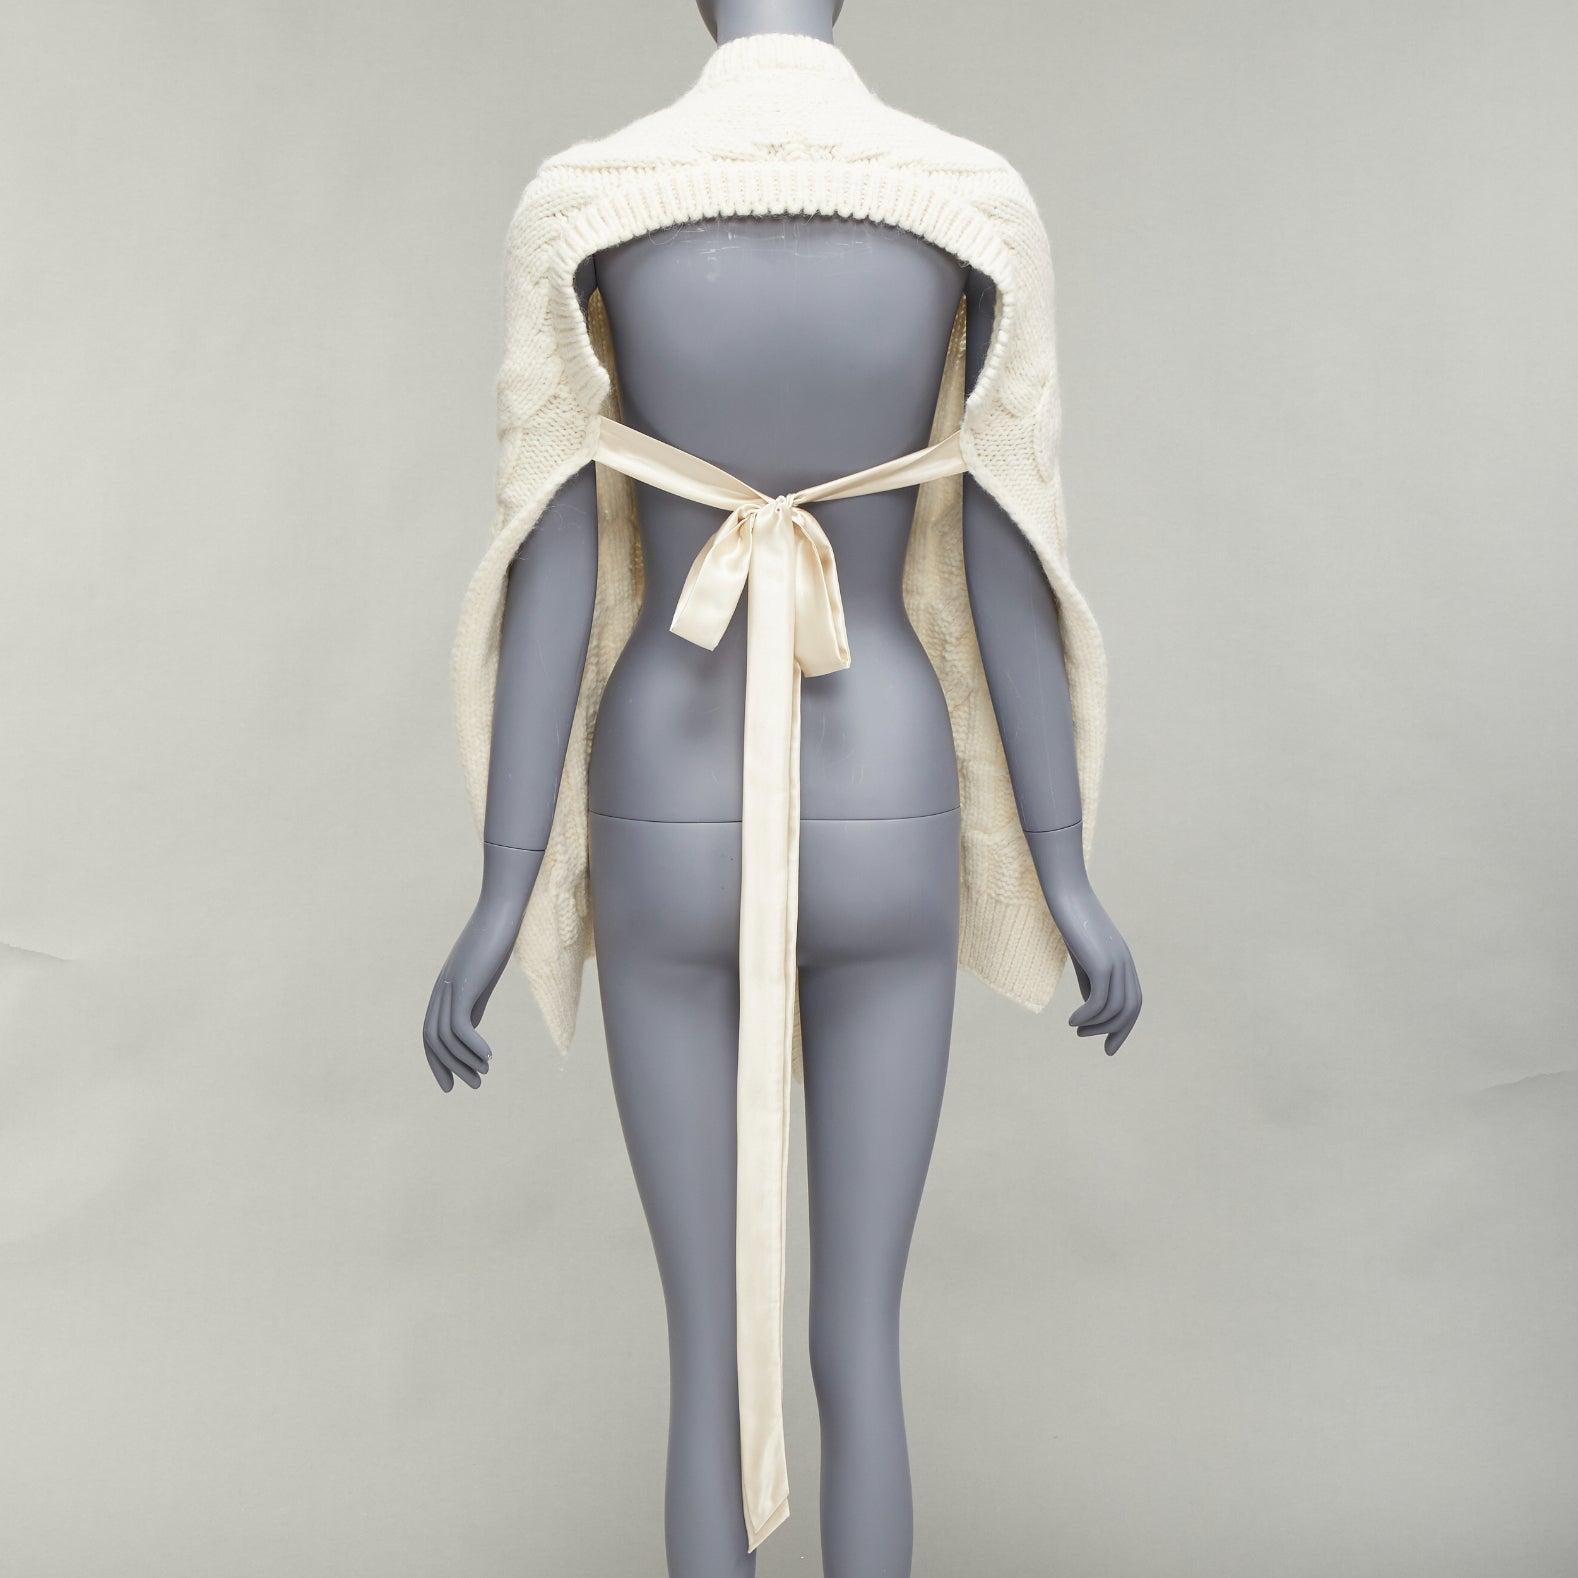 SIMONE ROCHA cream alpaca ribbon tie open back draped cable knit top S
Reference: LNKO/A02257
Brand: Simone Rocha
Material: Alpaca, Blend
Color: Cream
Pattern: Solid
Closure: Self Tie
Extra Details: Ribbon tie and open back at back.
Made in: